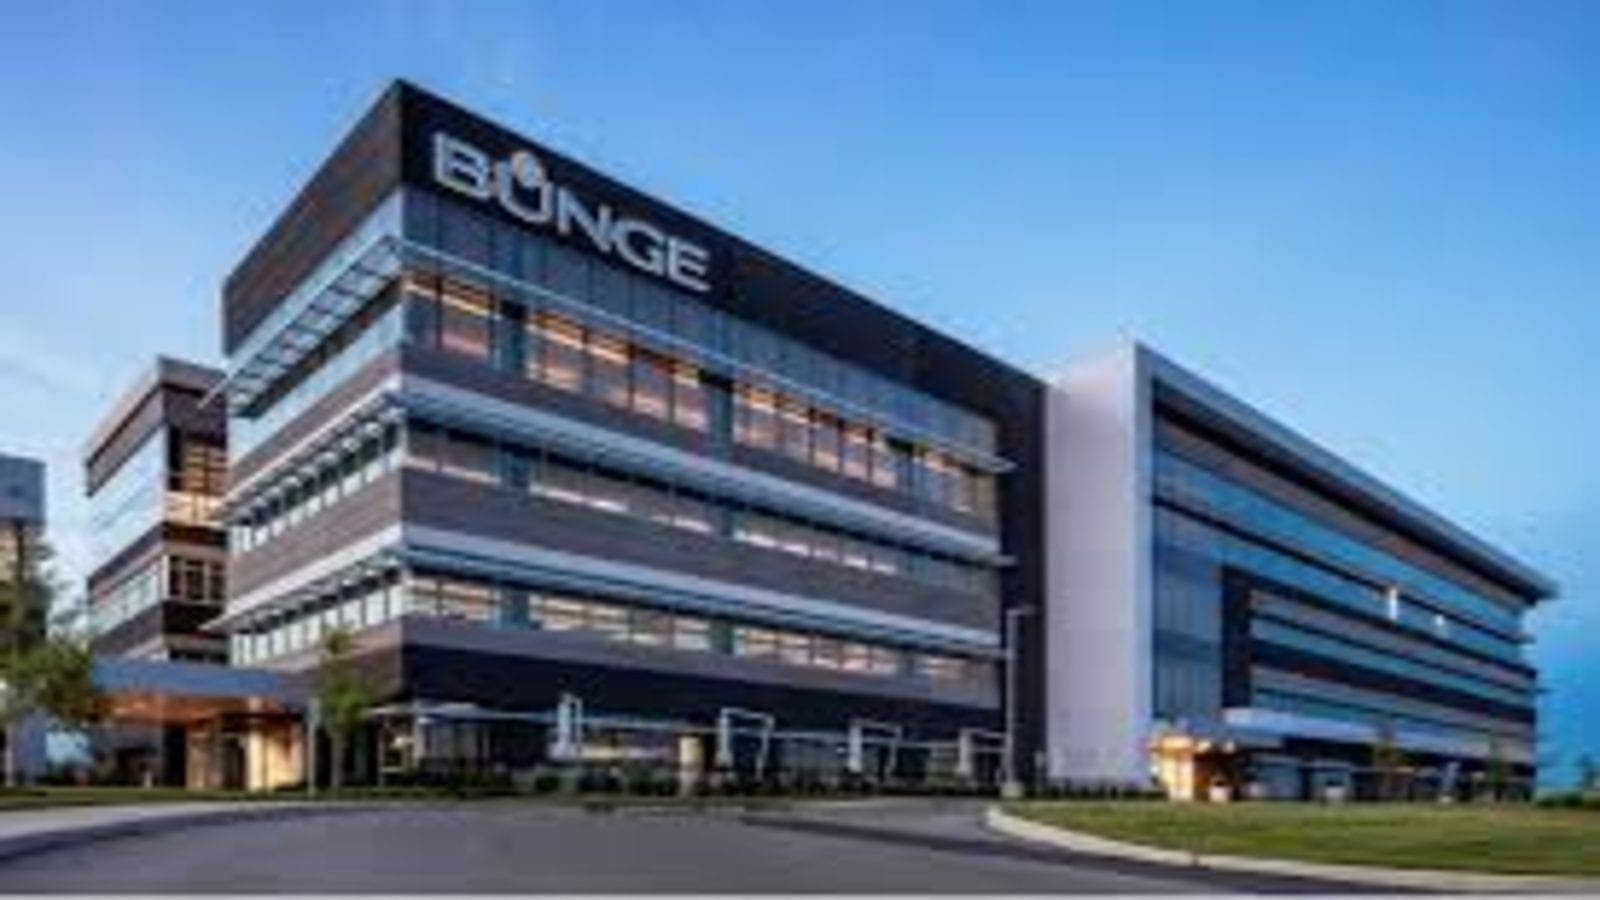 Bunge to sell refinery to raise cash for operational flexibility and efficiency